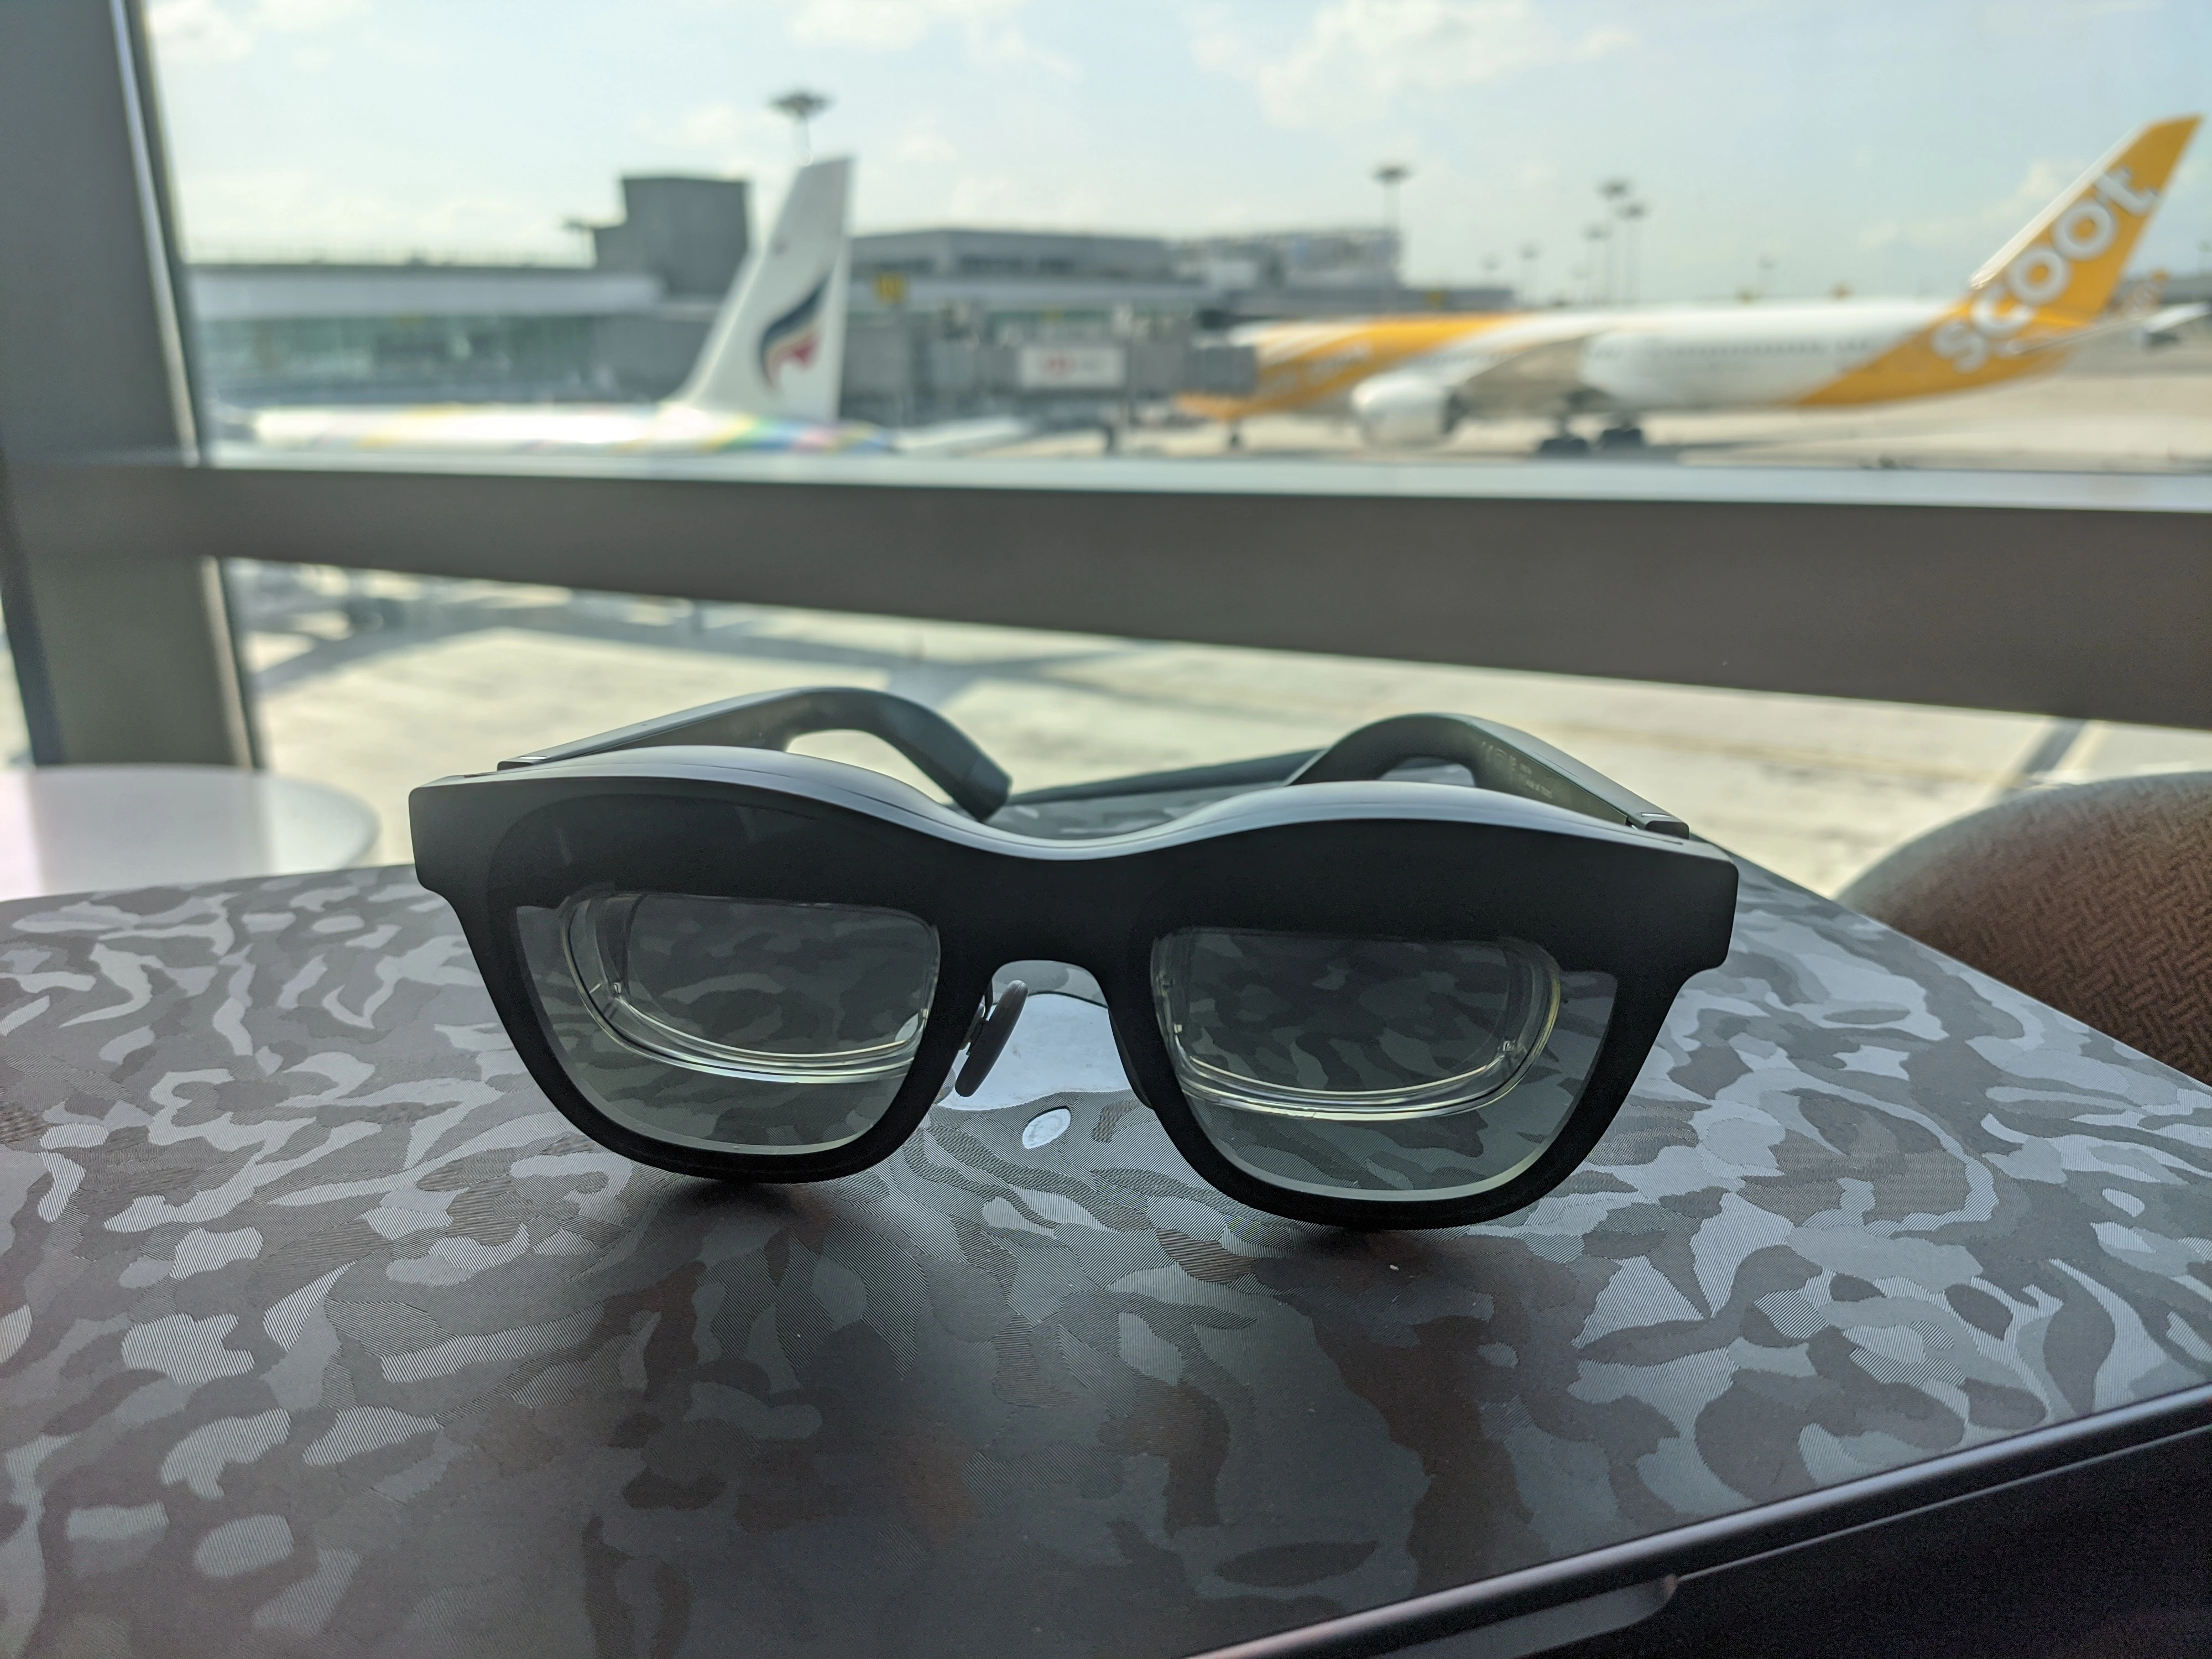 AR glasses and laptop in an airport